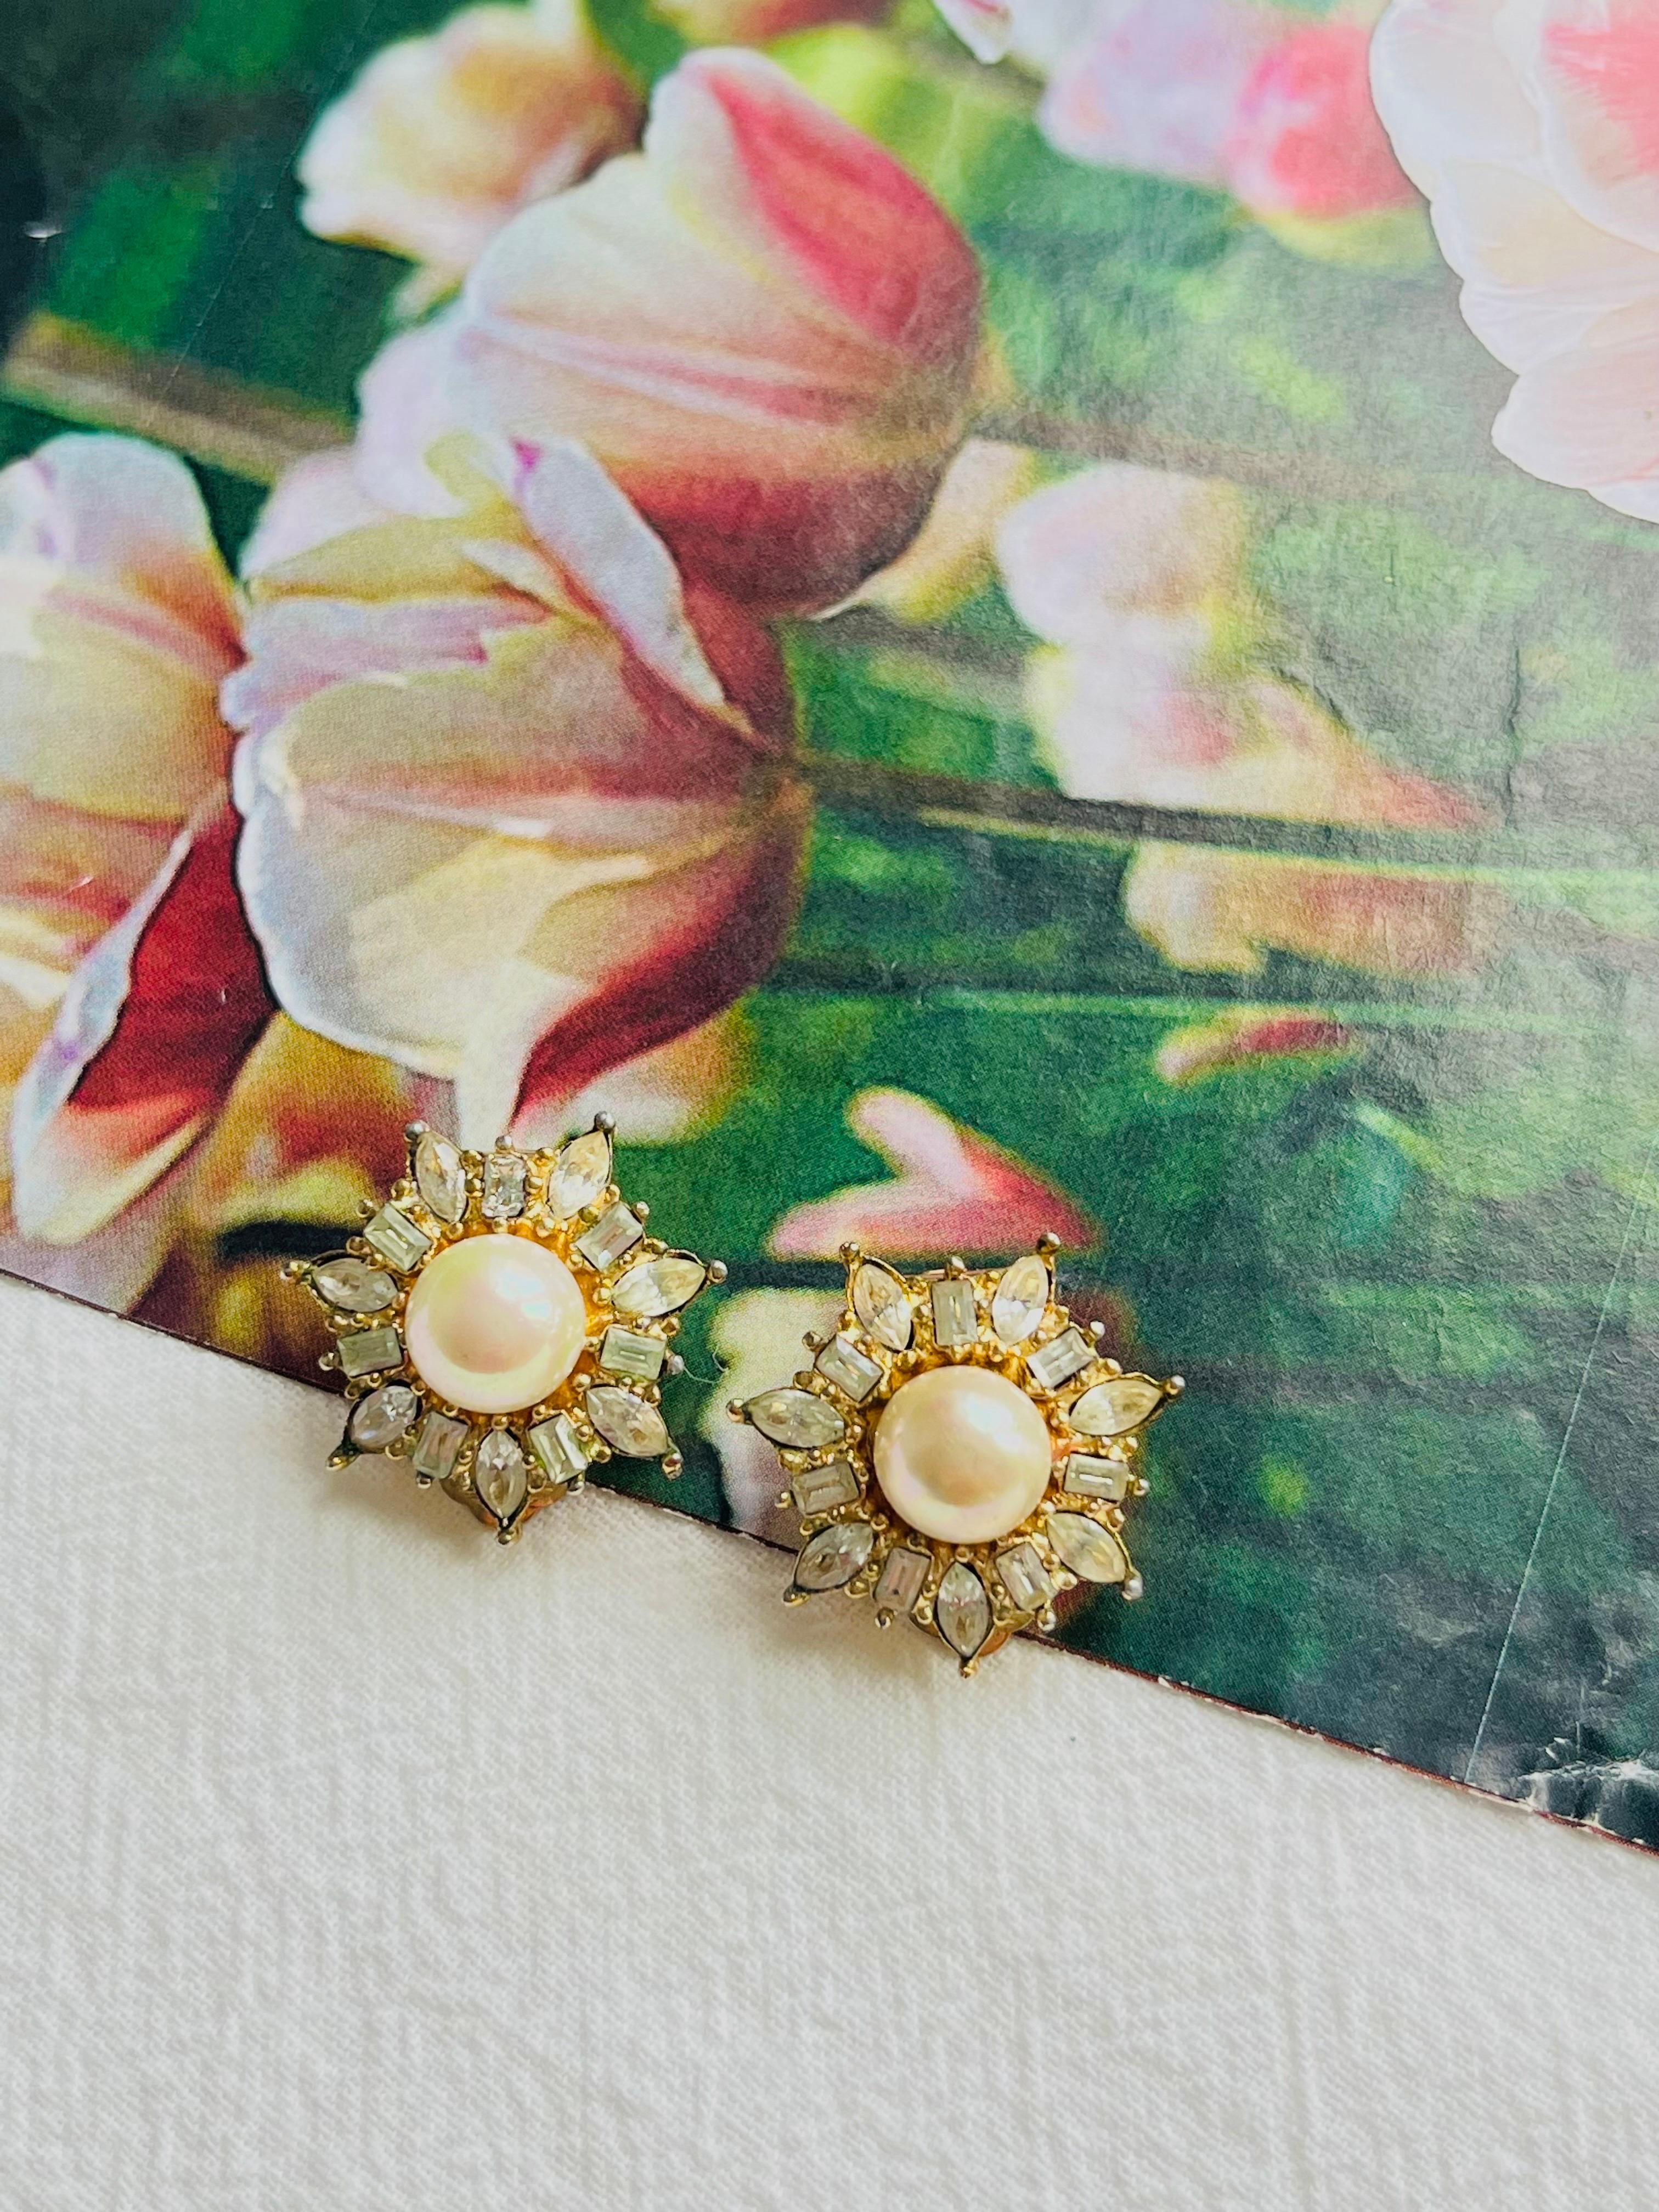 Christian Dior Vintage 1980s Radiant Flower Snowflake Pearl Crystals Earrings In Good Condition For Sale In Wokingham, England